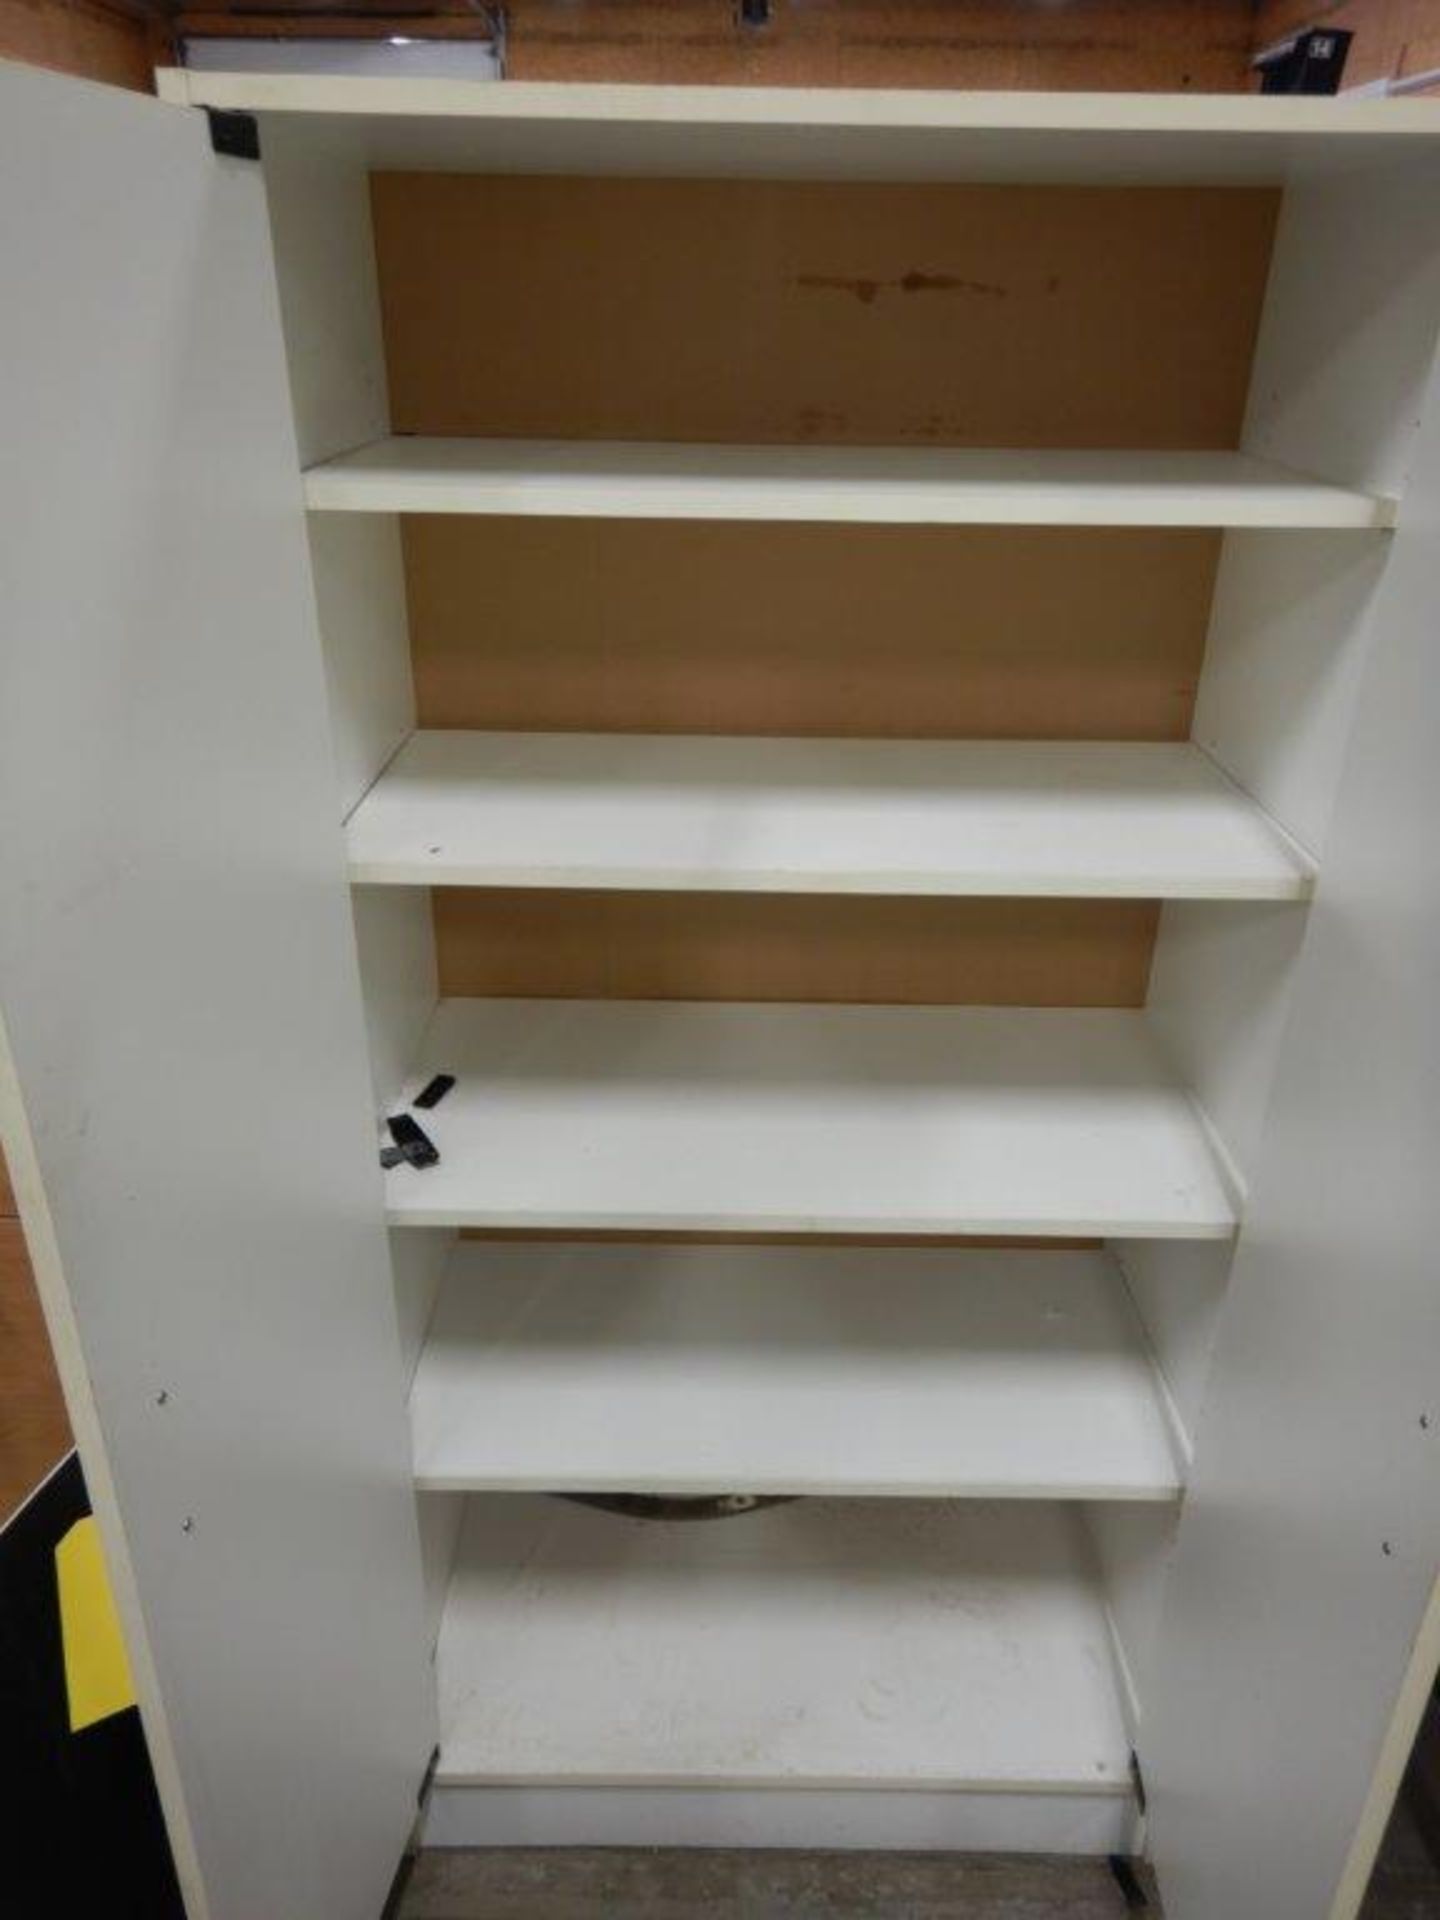 STORAGE CABINET WITH SHELVES 30X16X60